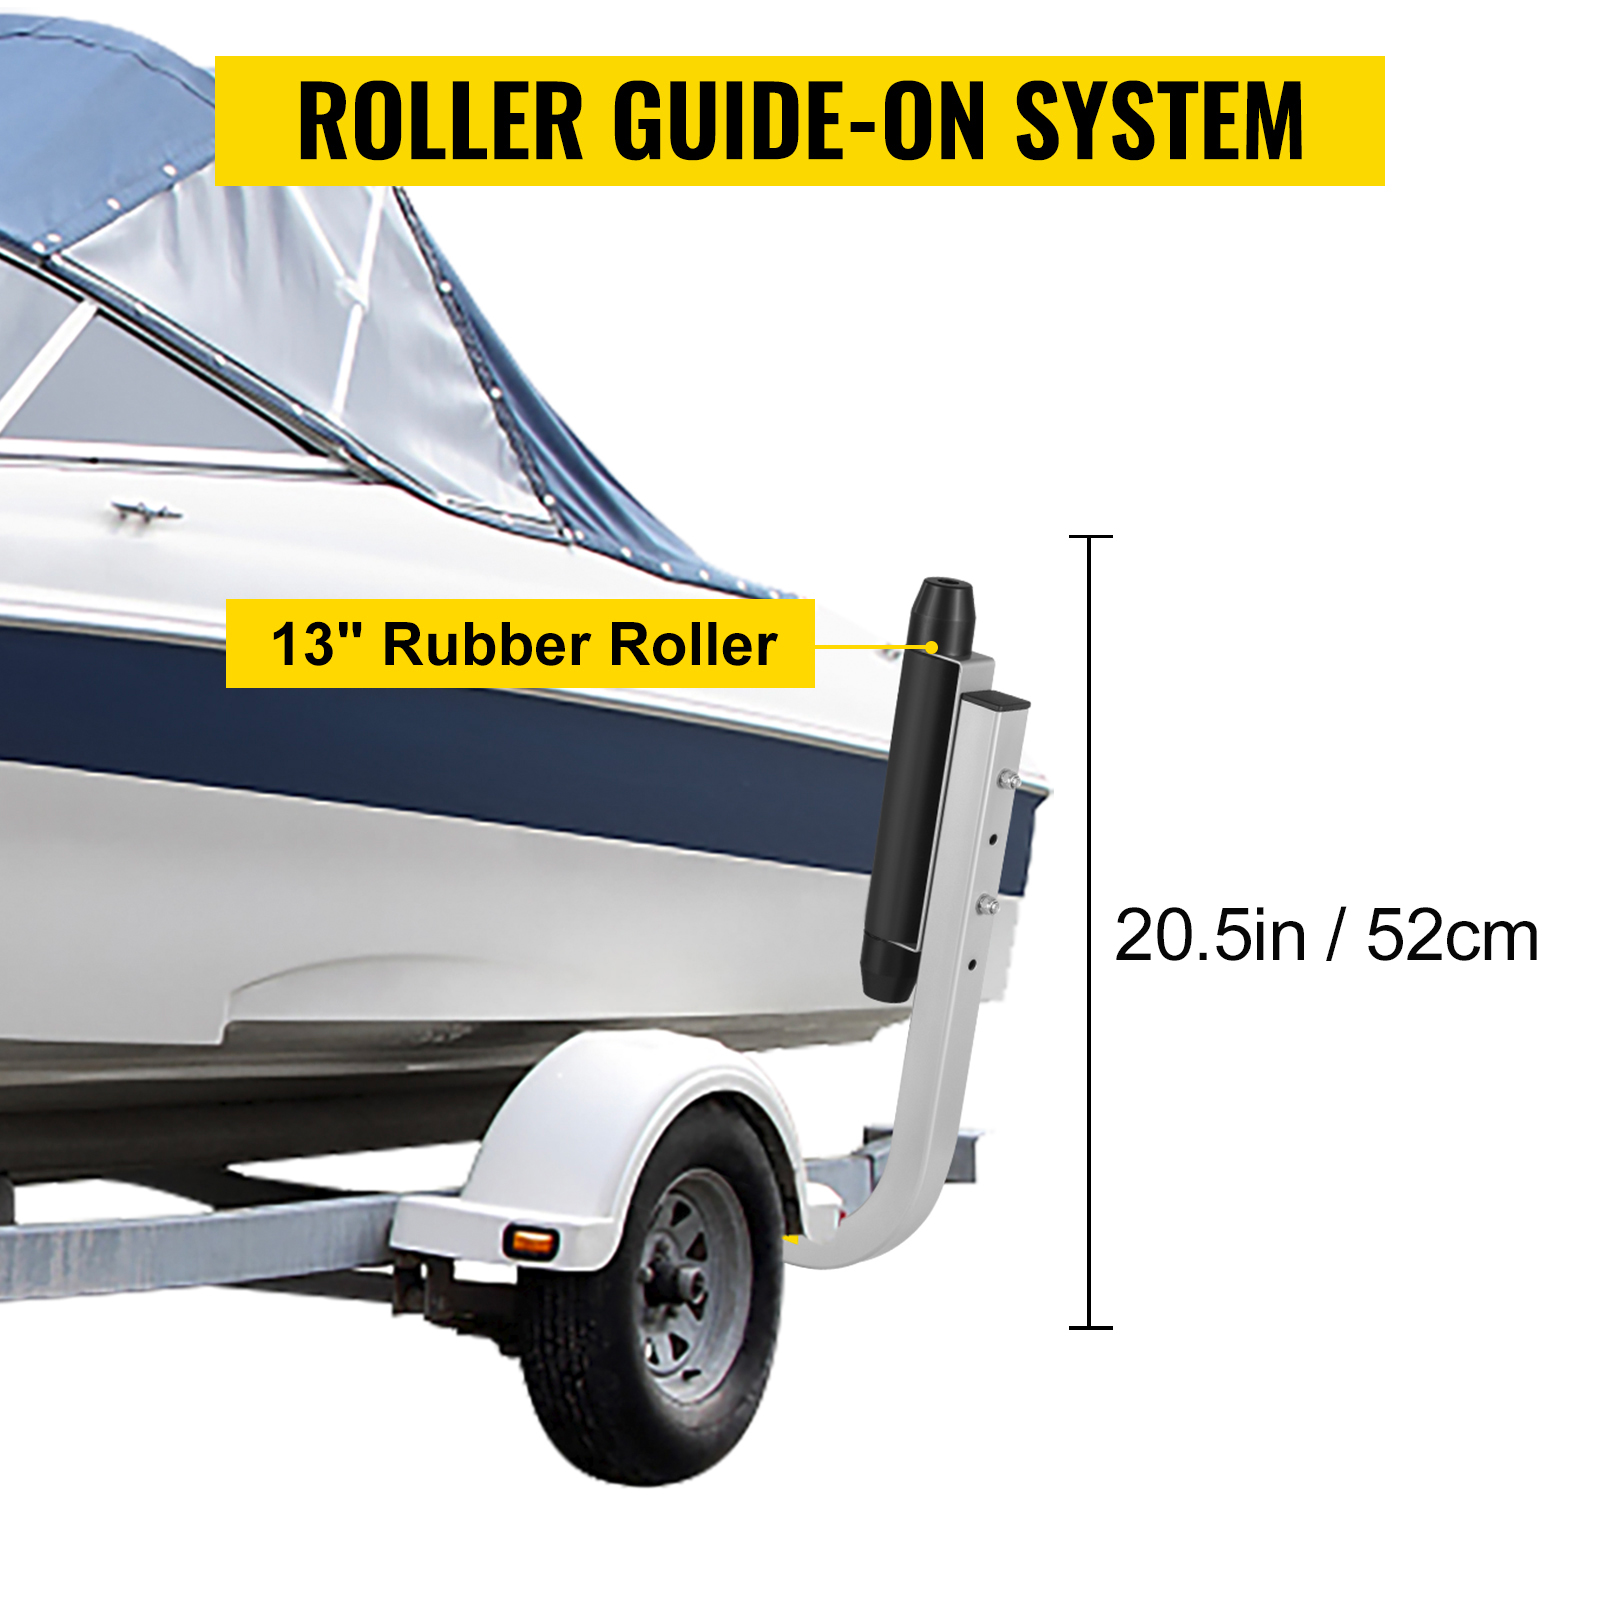 VEVOR Boat Trailer Guide Ons 2pcs Heavy-Duty Roller Guide-On System Galvanized Steel Trailer Guides Complete Mounting Accessories Included for Ski